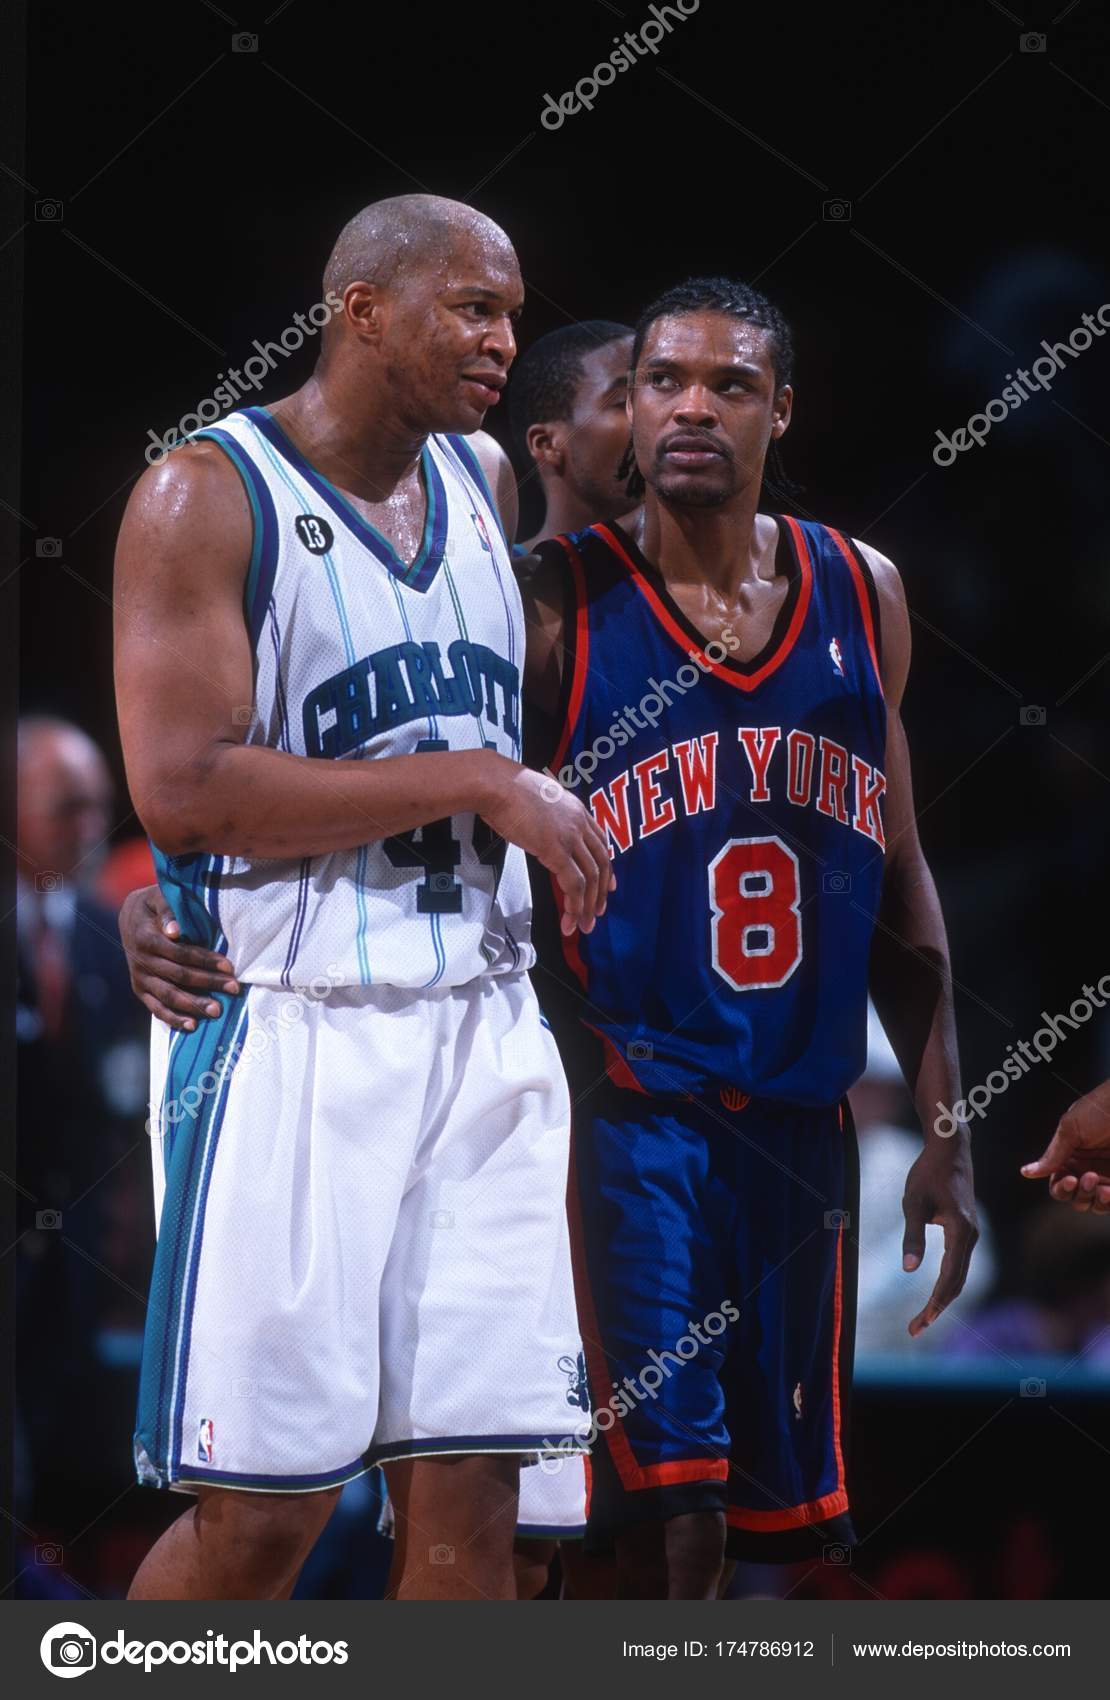 Latrell sprewell new york knicks hi-res stock photography and images - Alamy